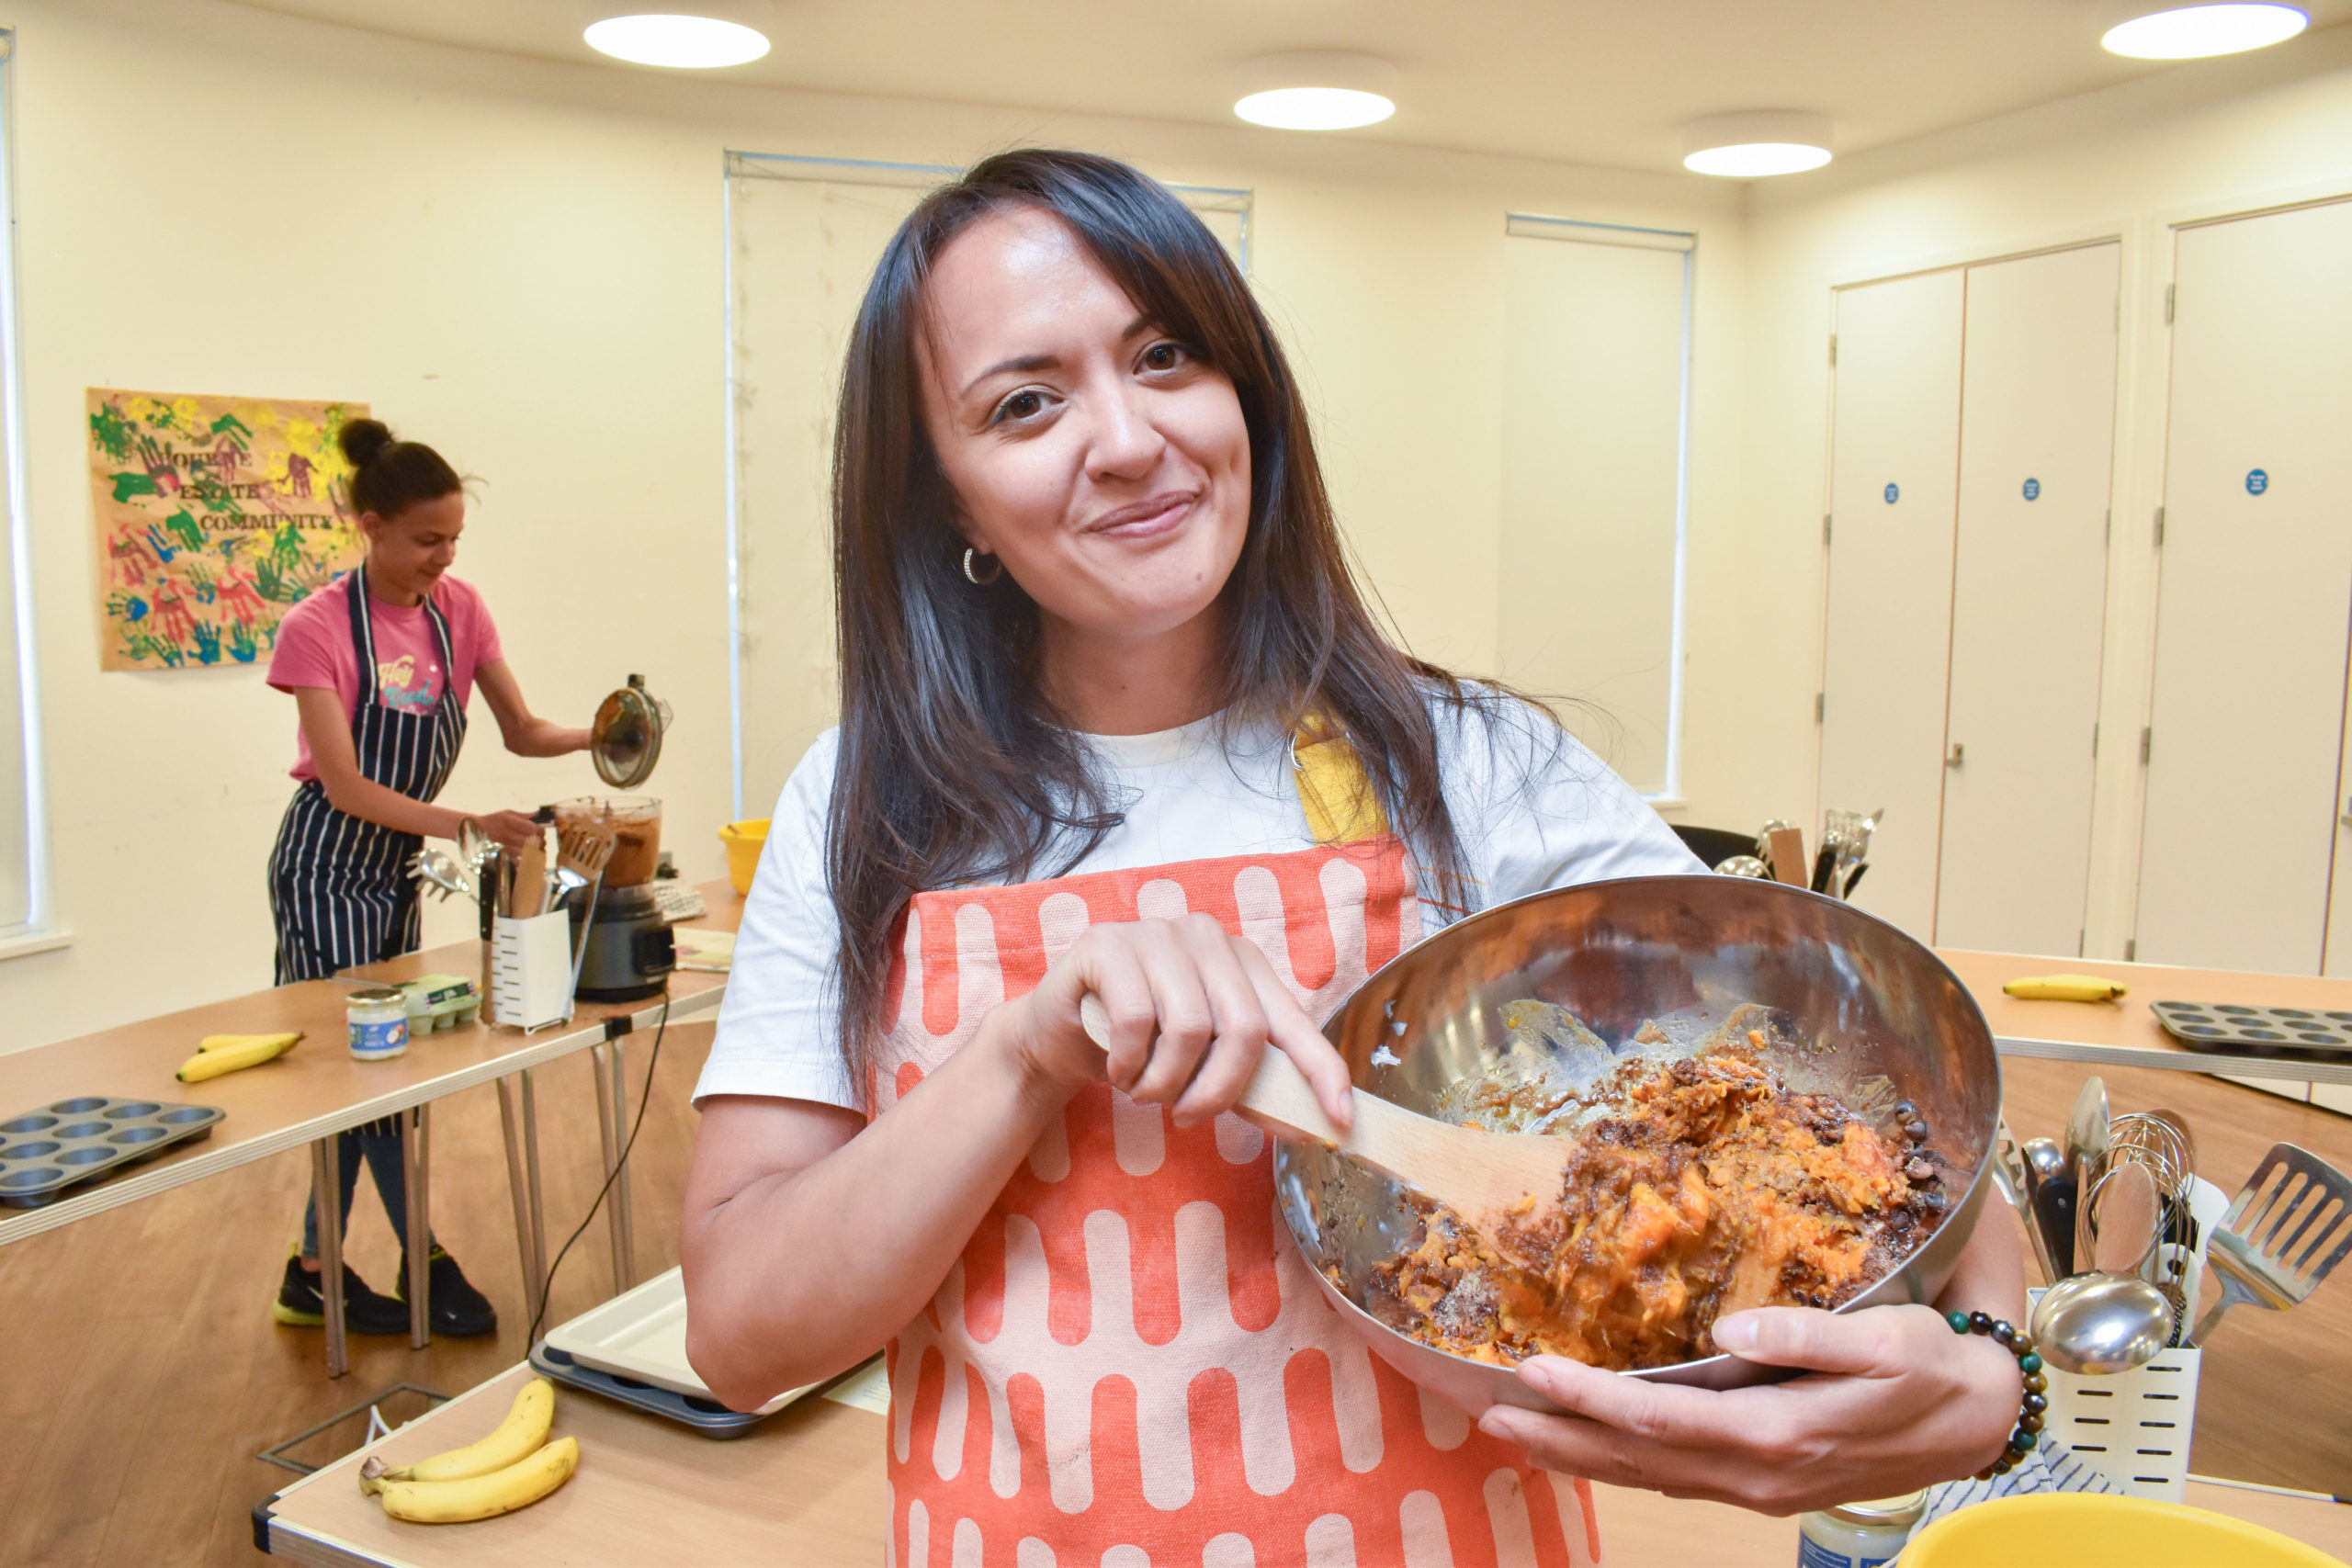 Charise stands inside the community centre at Bourne Estate smiling at the camera, wearing an apron and holding a mixing bowl of ingredients with a wooden spoon.